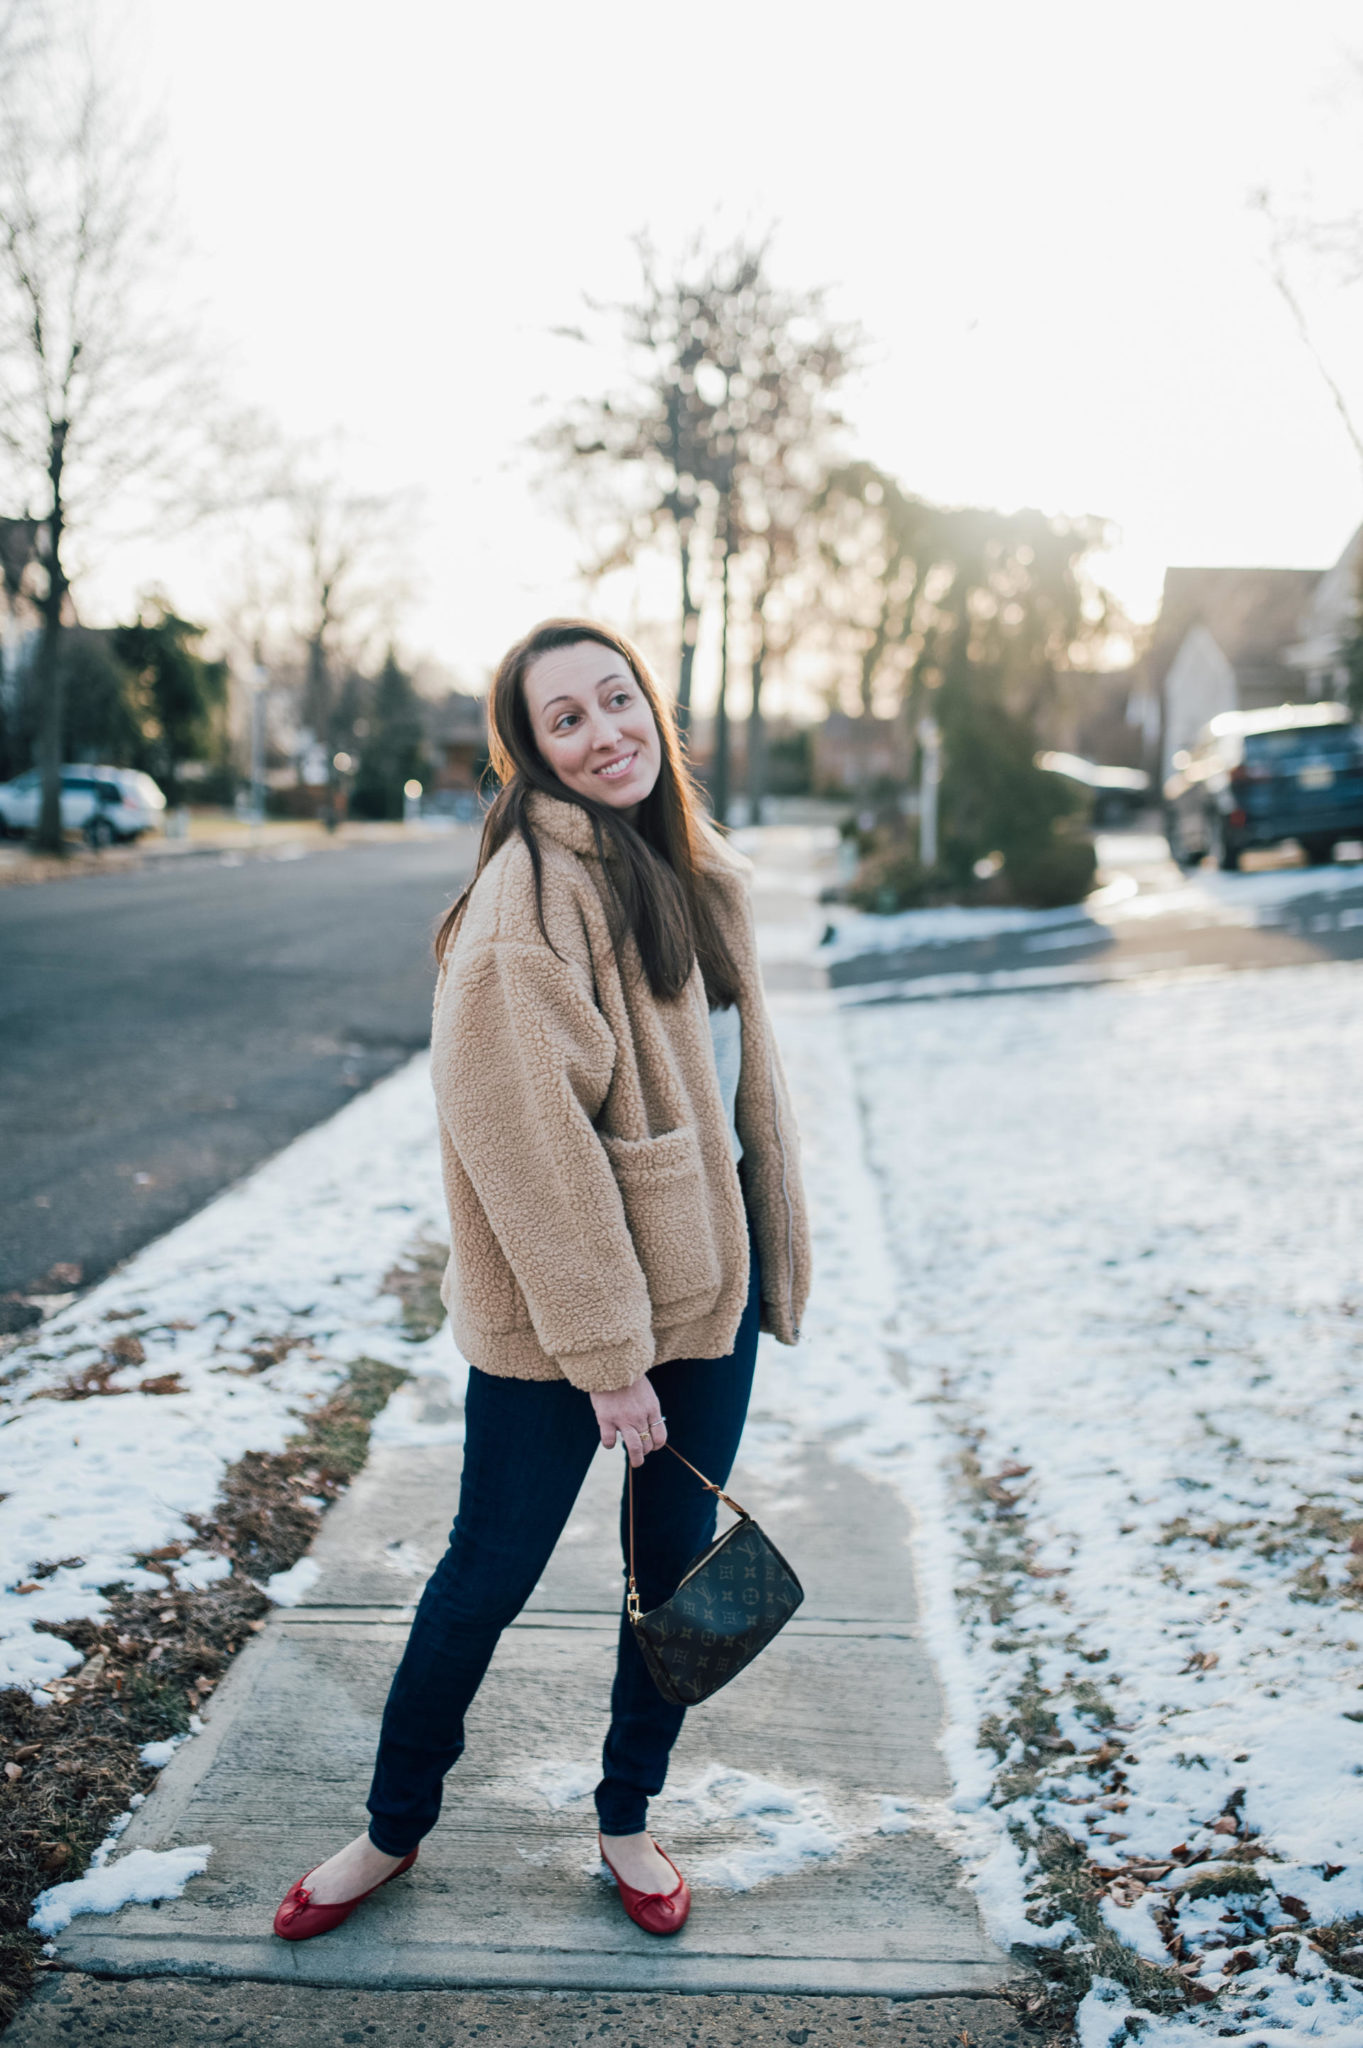 Valentines Day outfit by popular New Jersey fashion blogger What's For Dinner Esq.